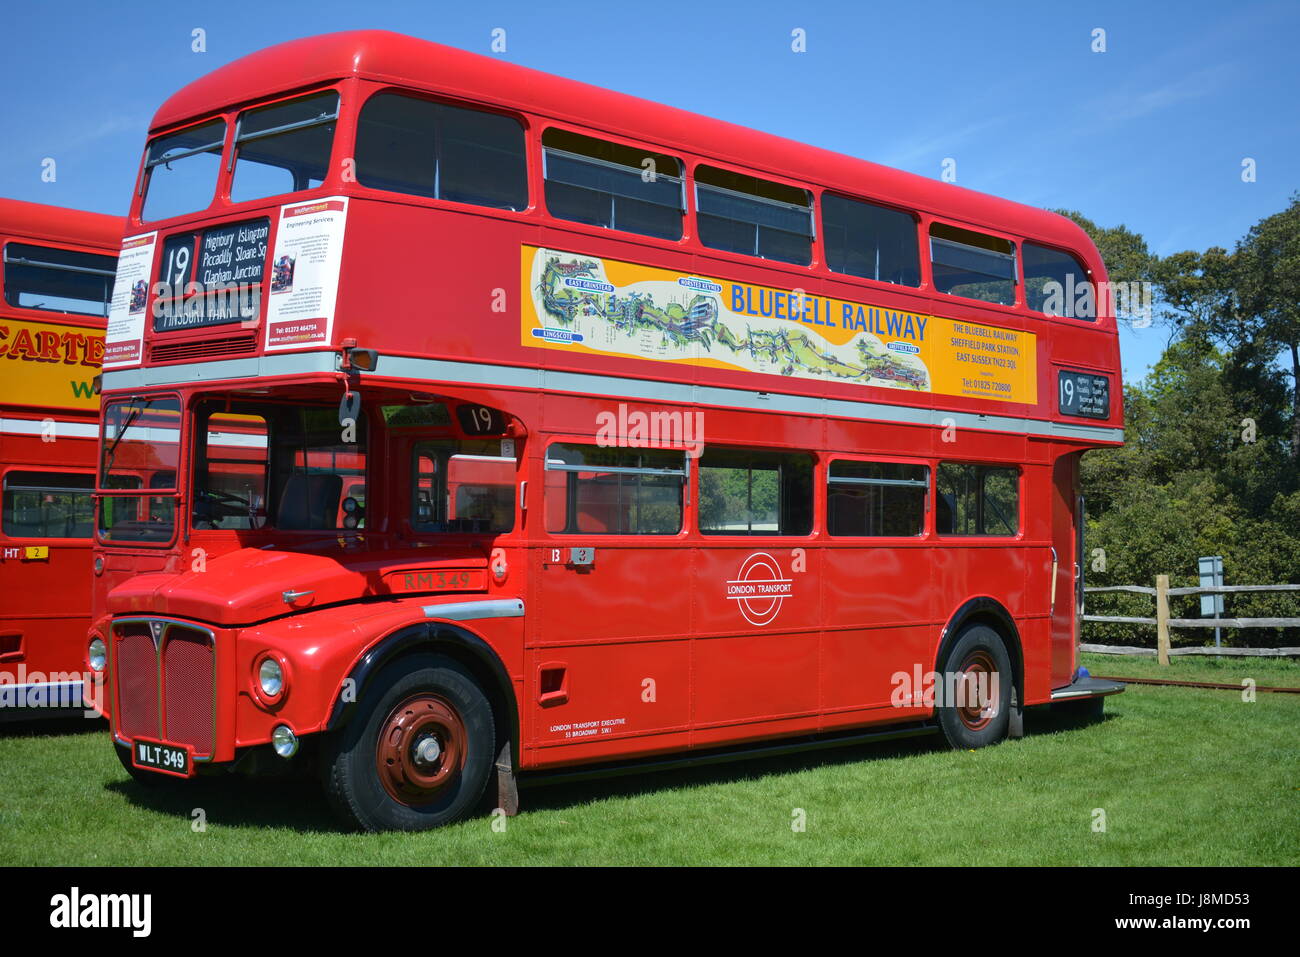 WLT349, RM349, 1960 London Transpot Routemaster im historischen Bus 2017 rally bei The Oval, Hastings Stockfoto